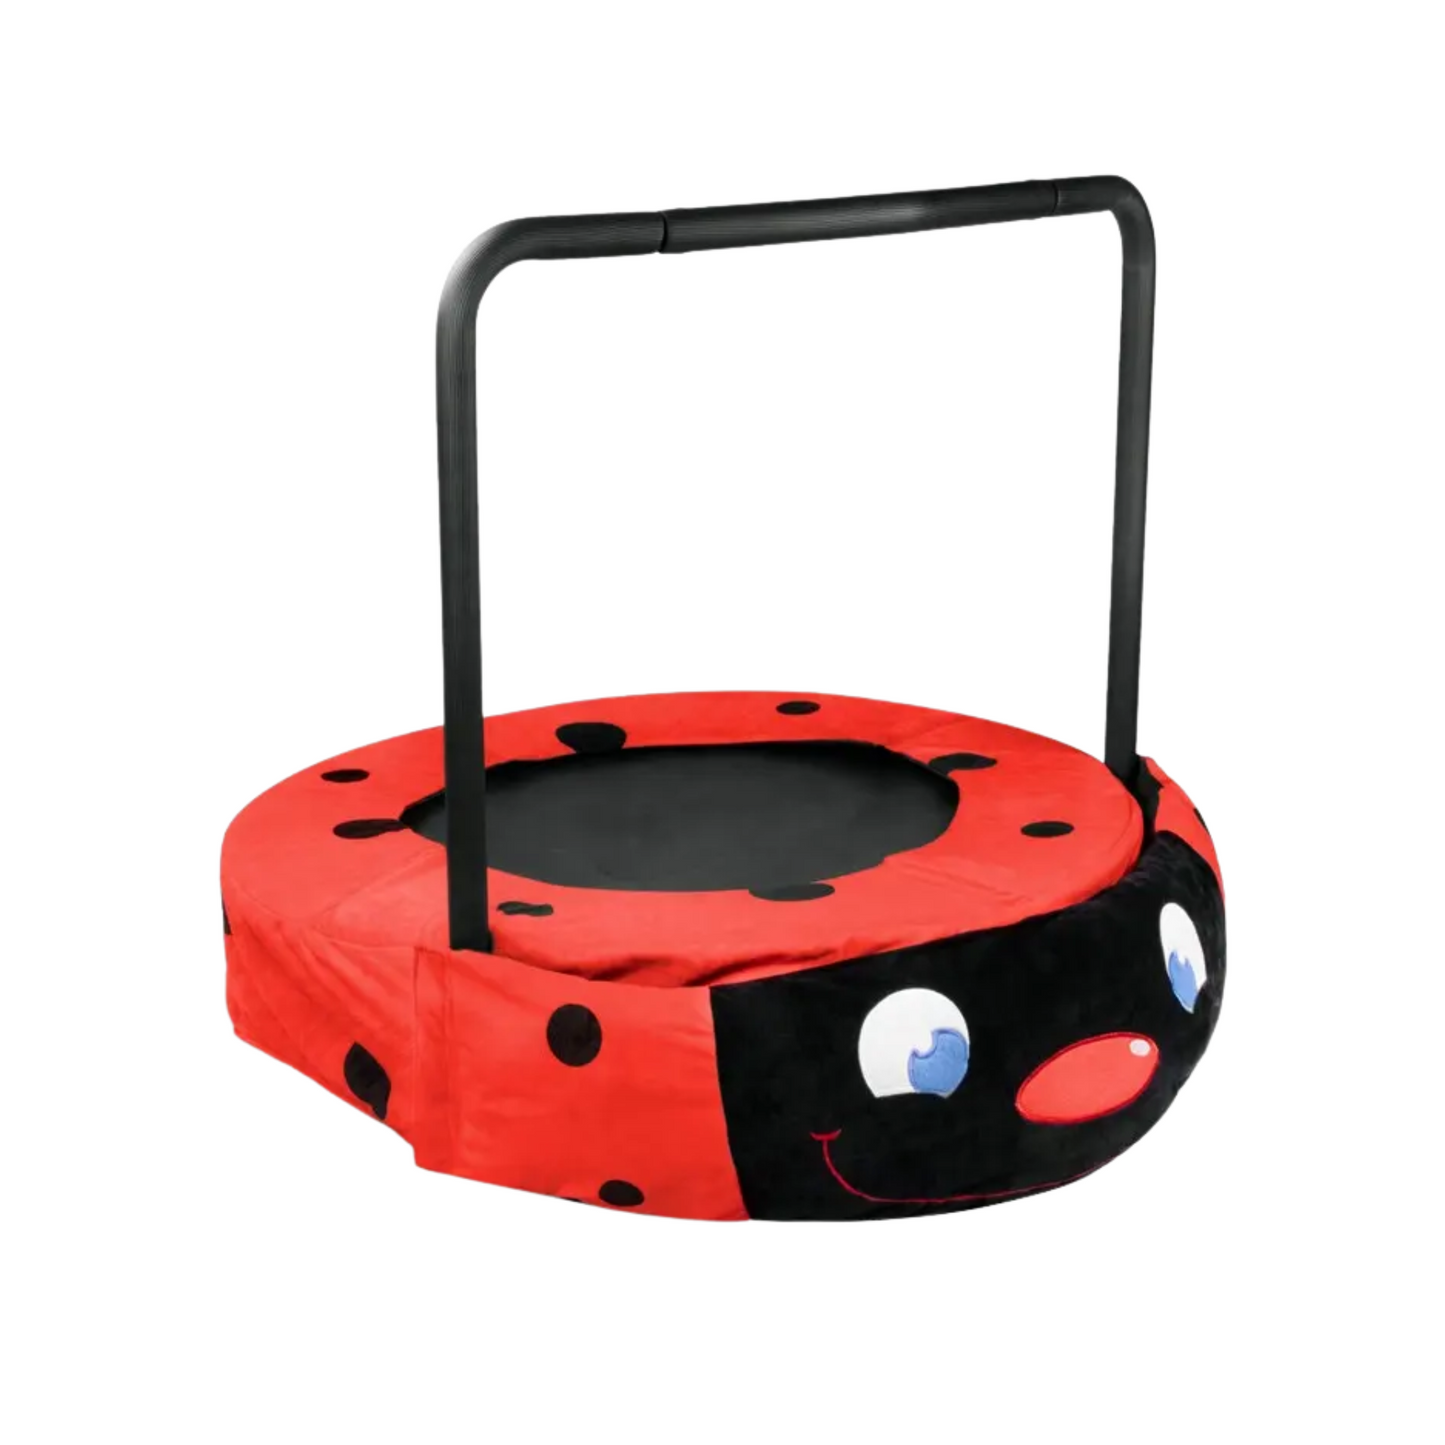 Assembled Children's Trampoline: Happy Expression, Ladybug Design, Foldable Iron Tube - Ideal for Kids Age 3-7 (Outdoor/Indoor, Black/Red)